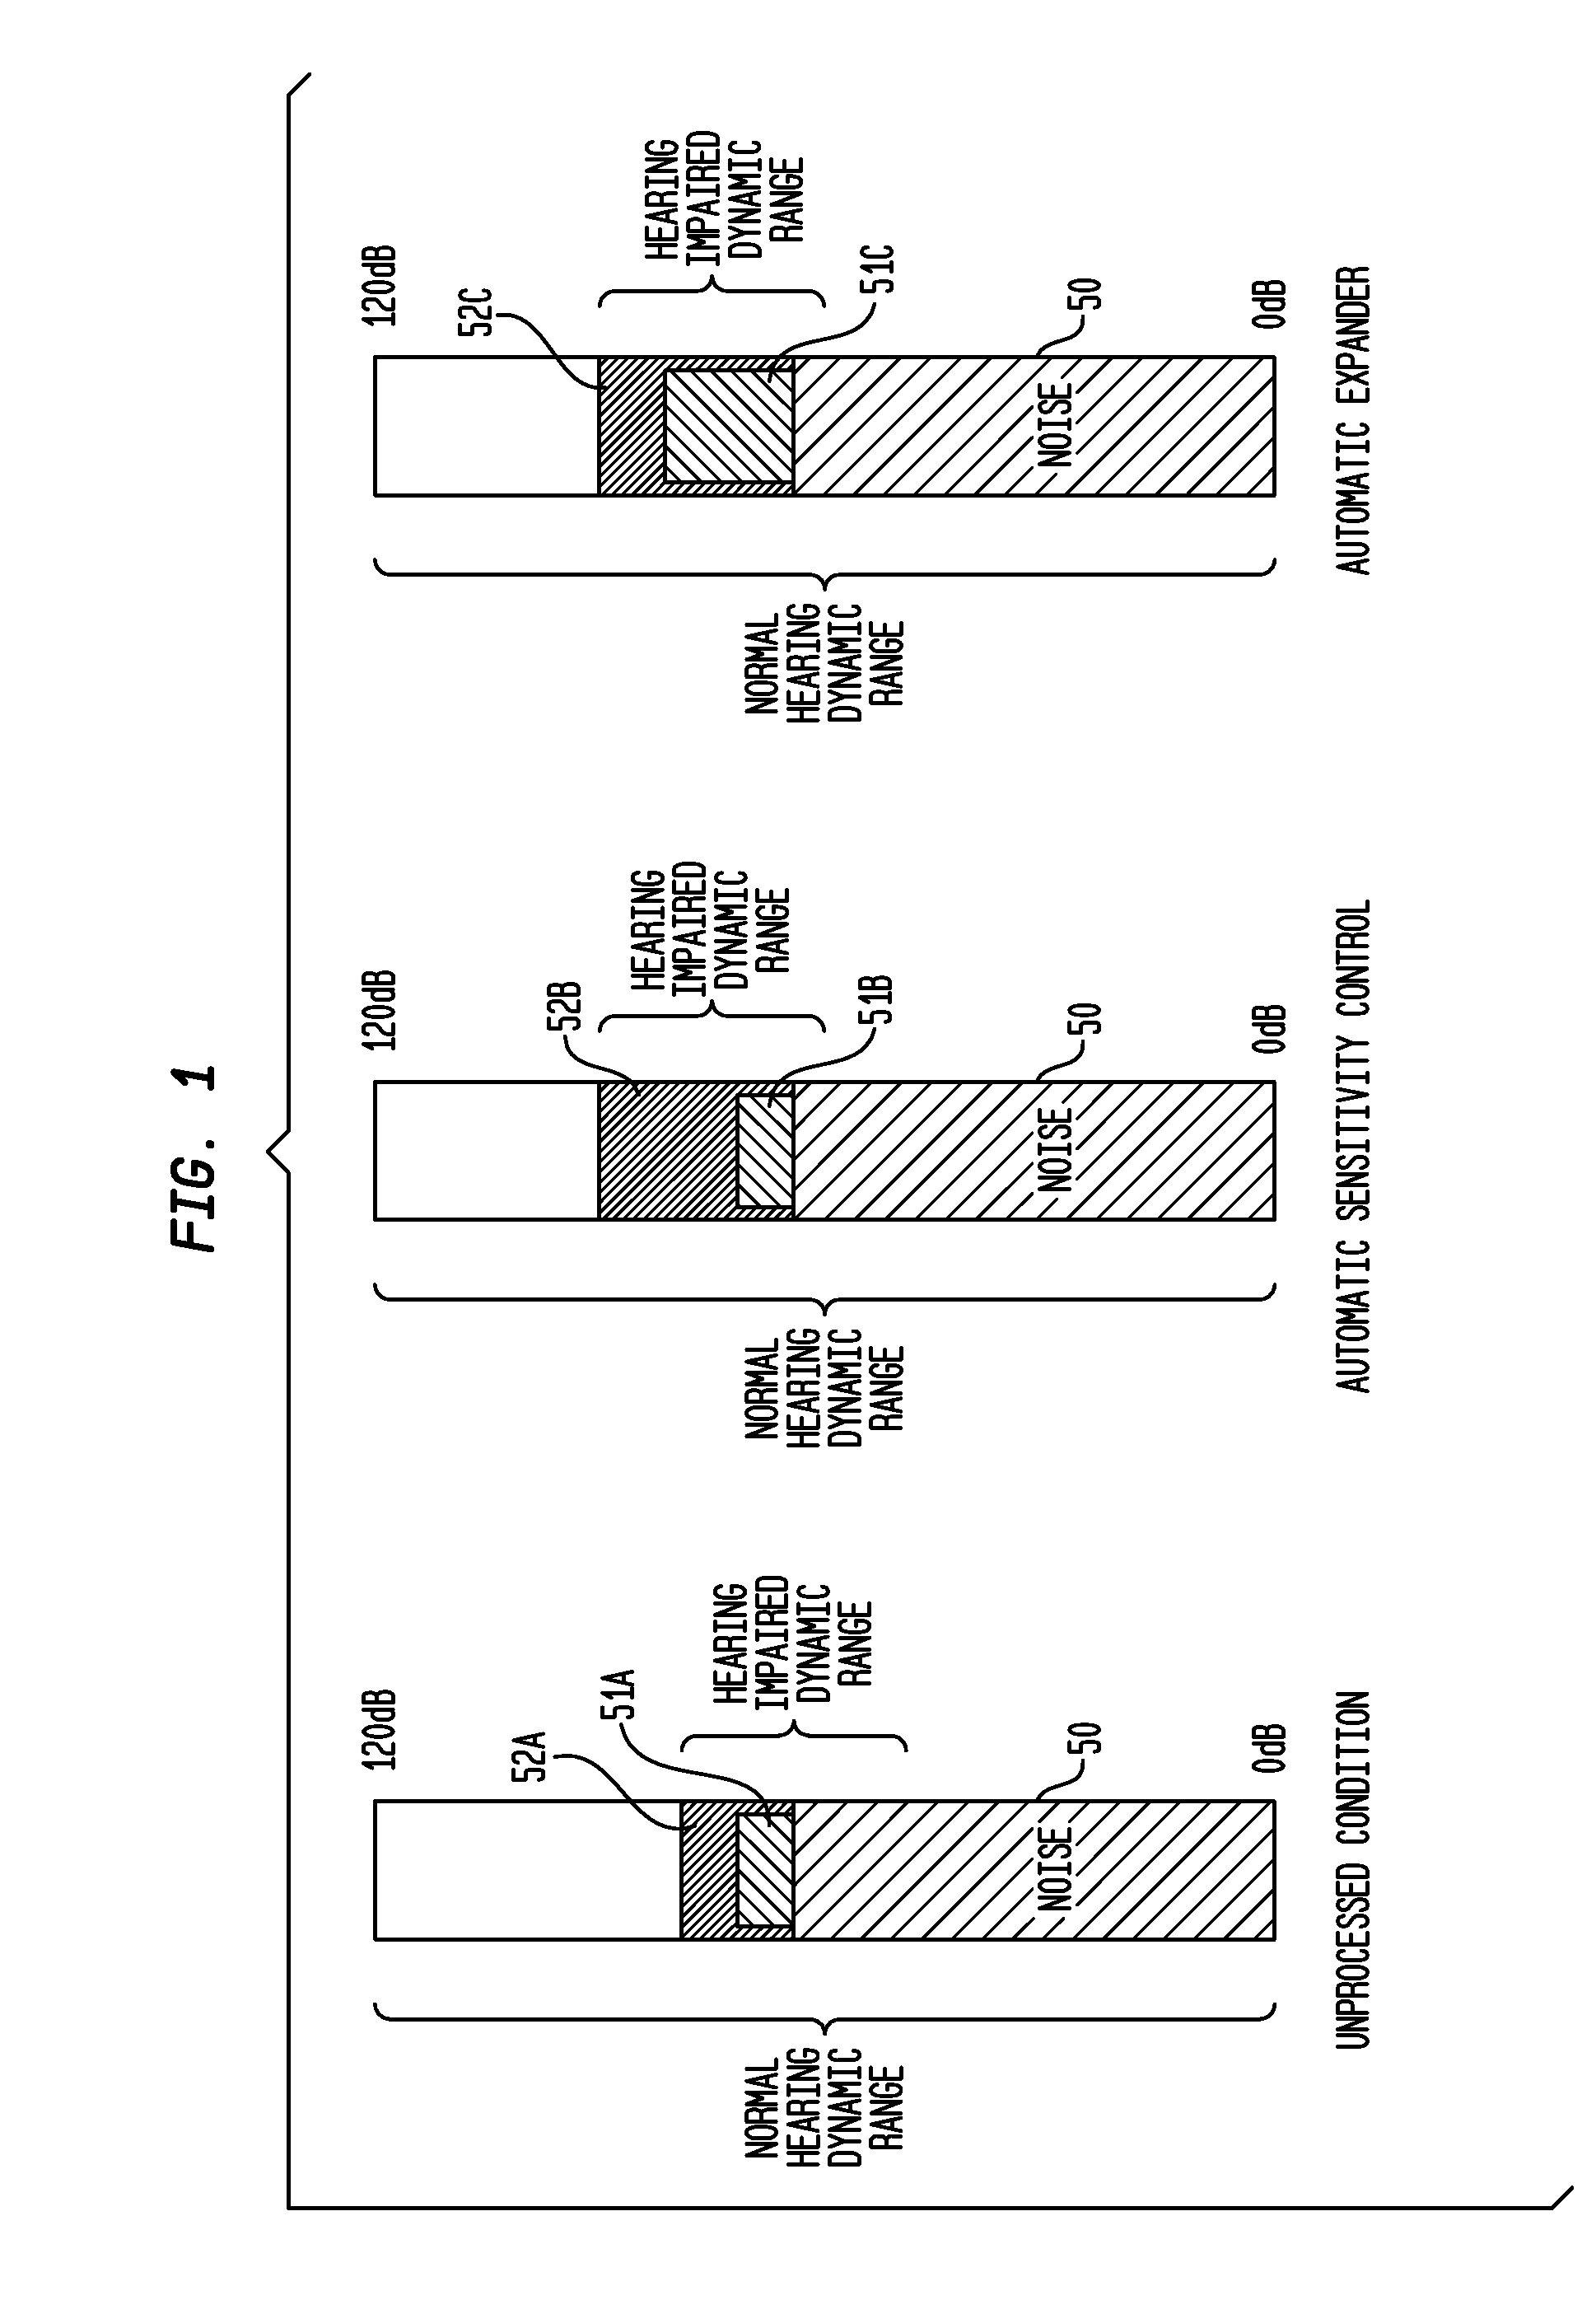 Acoustic processing method and apparatus